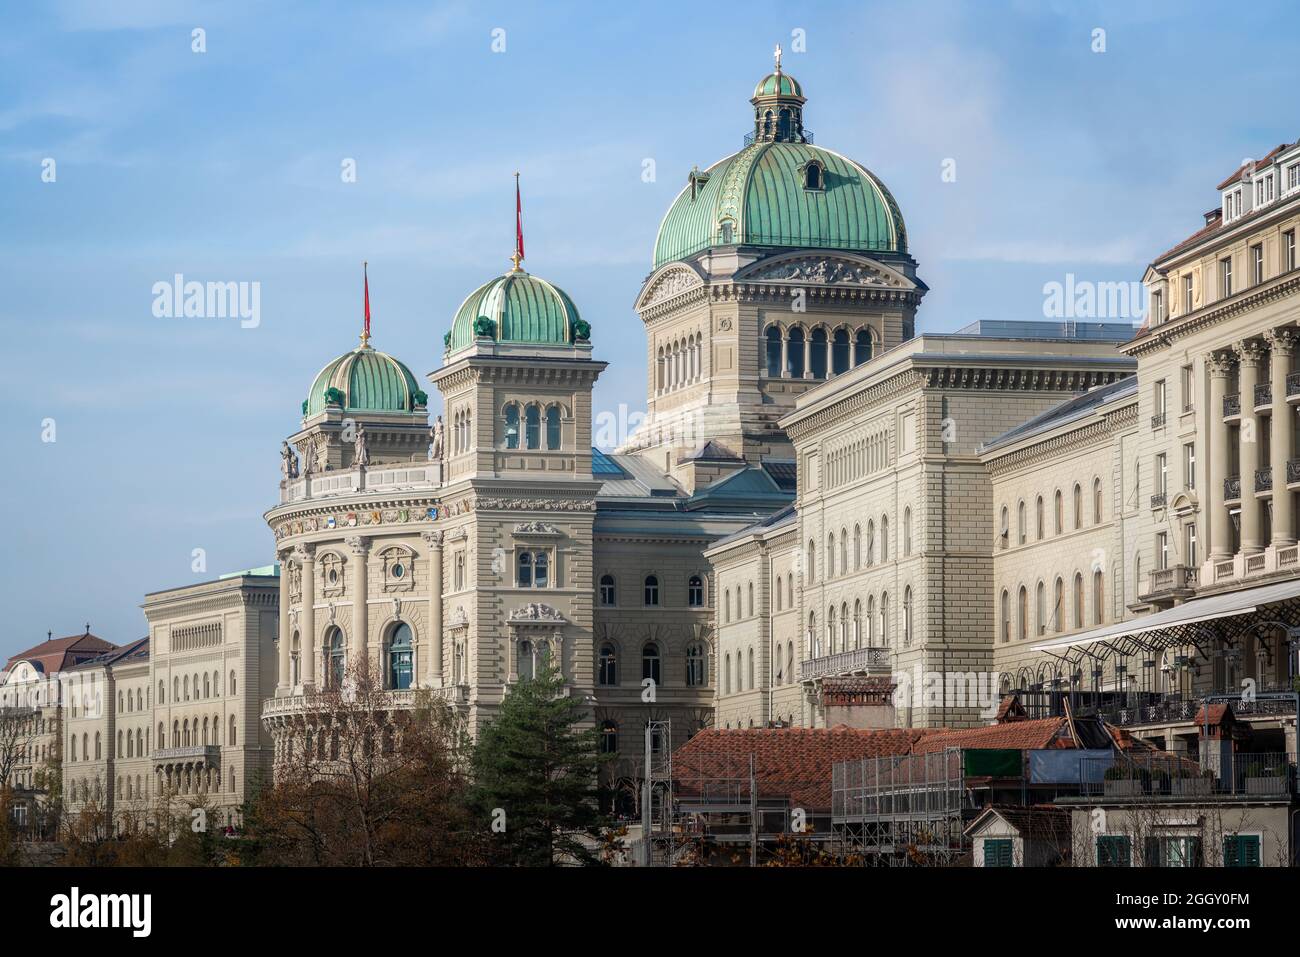 Federal Palace of Switzerland (Bundeshaus) - Switzerland Government Building house of the Federal Assembly and Federal Council - Bern, Switzerland Stock Photo